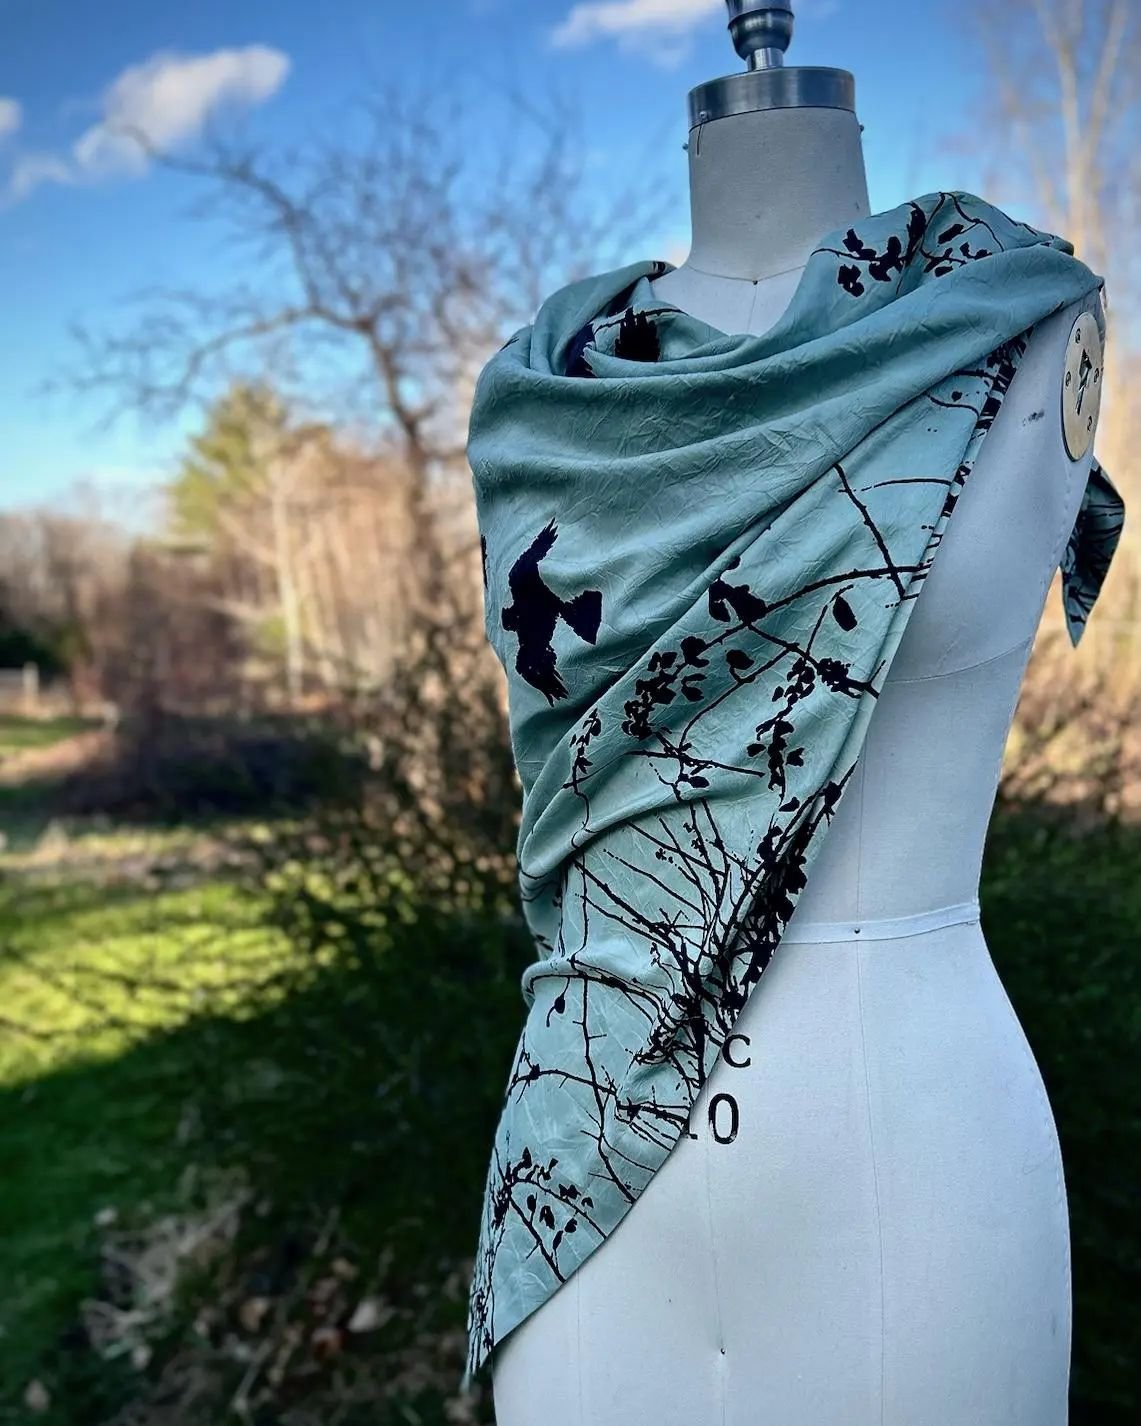 I spent all last week working on solid pieces meant to highlight just the plant dyes and the cut, so today it was time to focus on prints. I have a love/hate relationship with scarves-- they drive me crazy as a business owner trying to be efficient, 